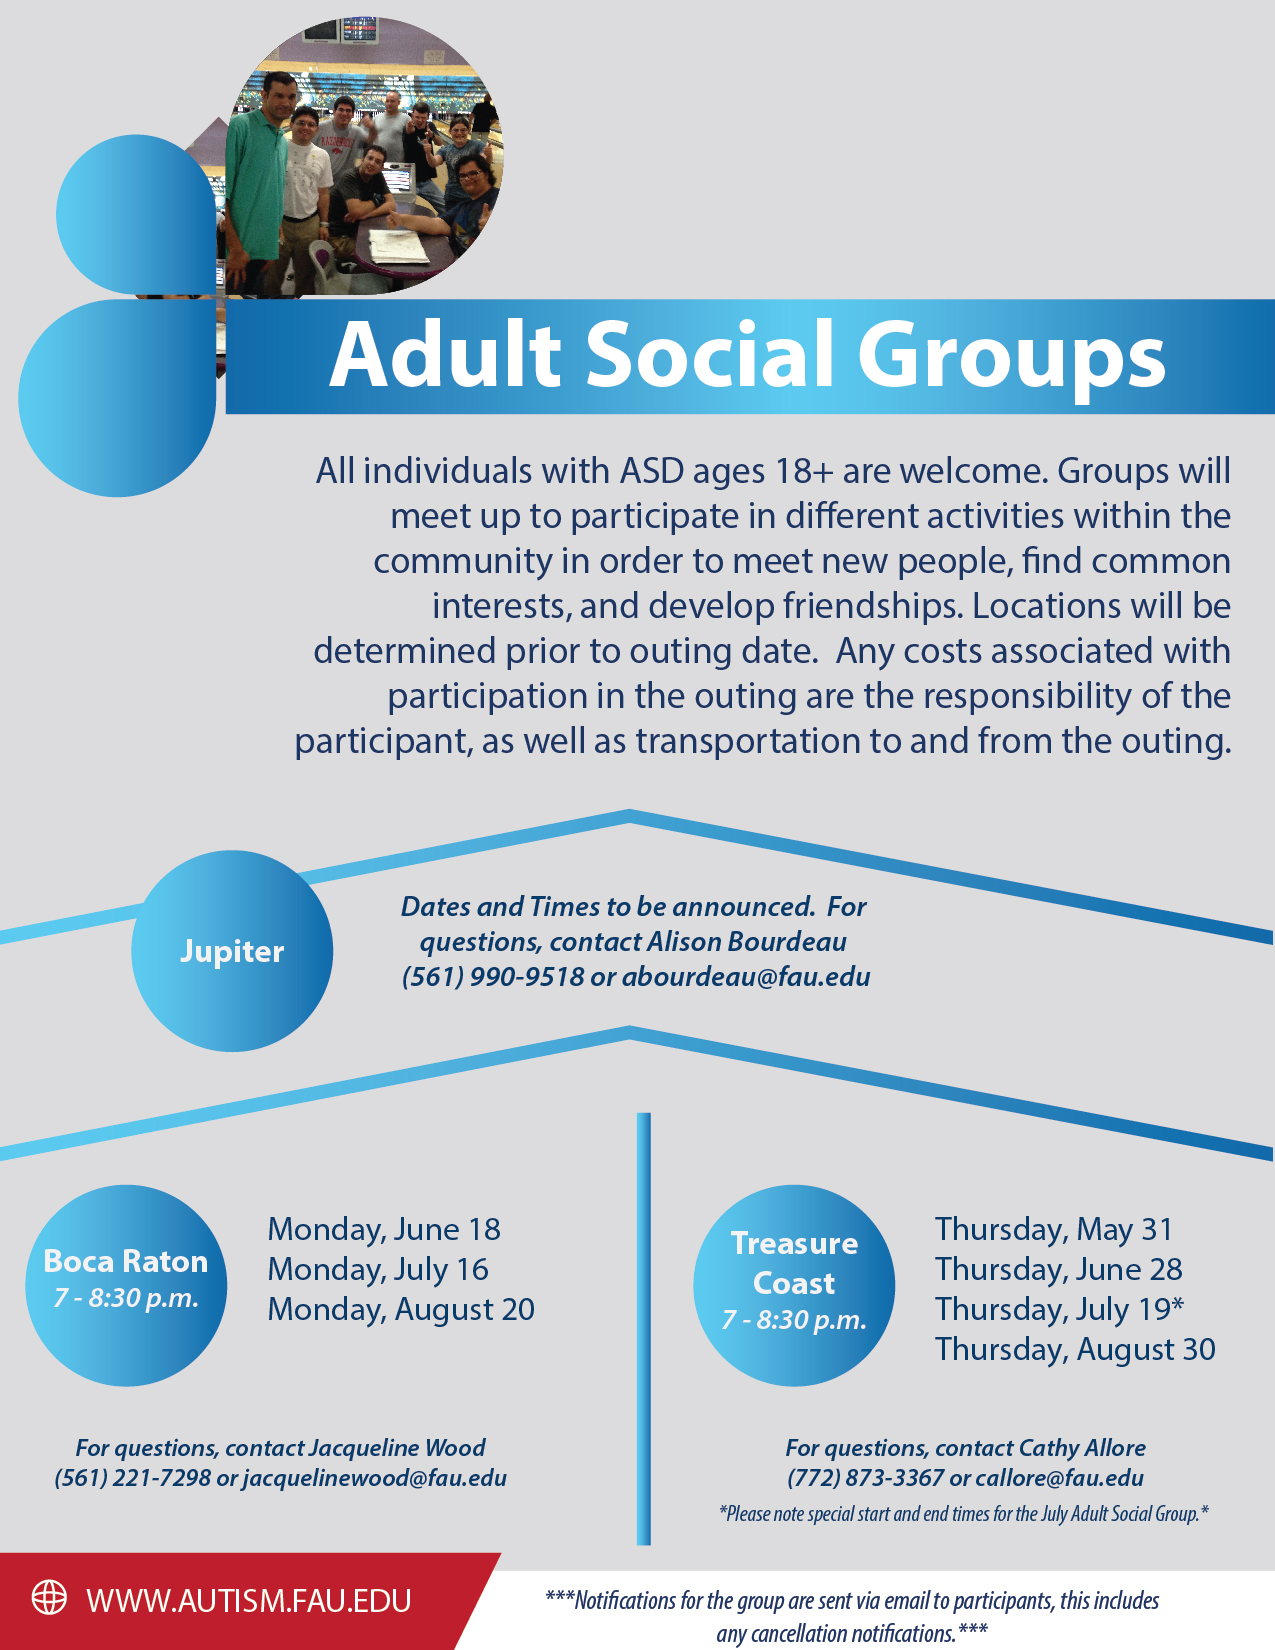 Adult Social Group with Autism